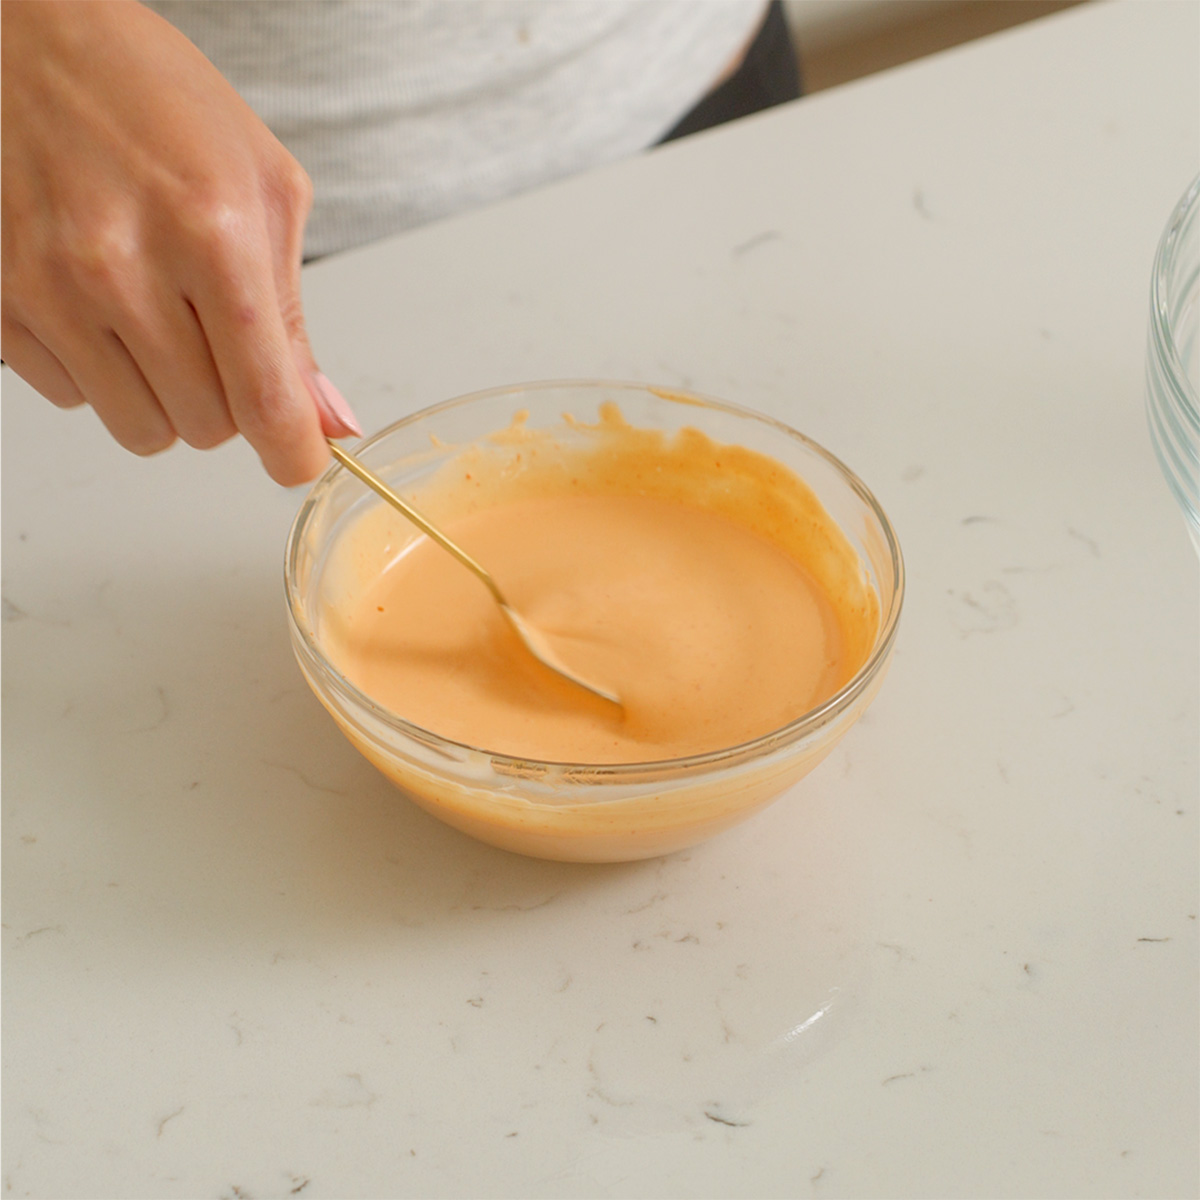 Mixing together spicy mayo in a small bowl.